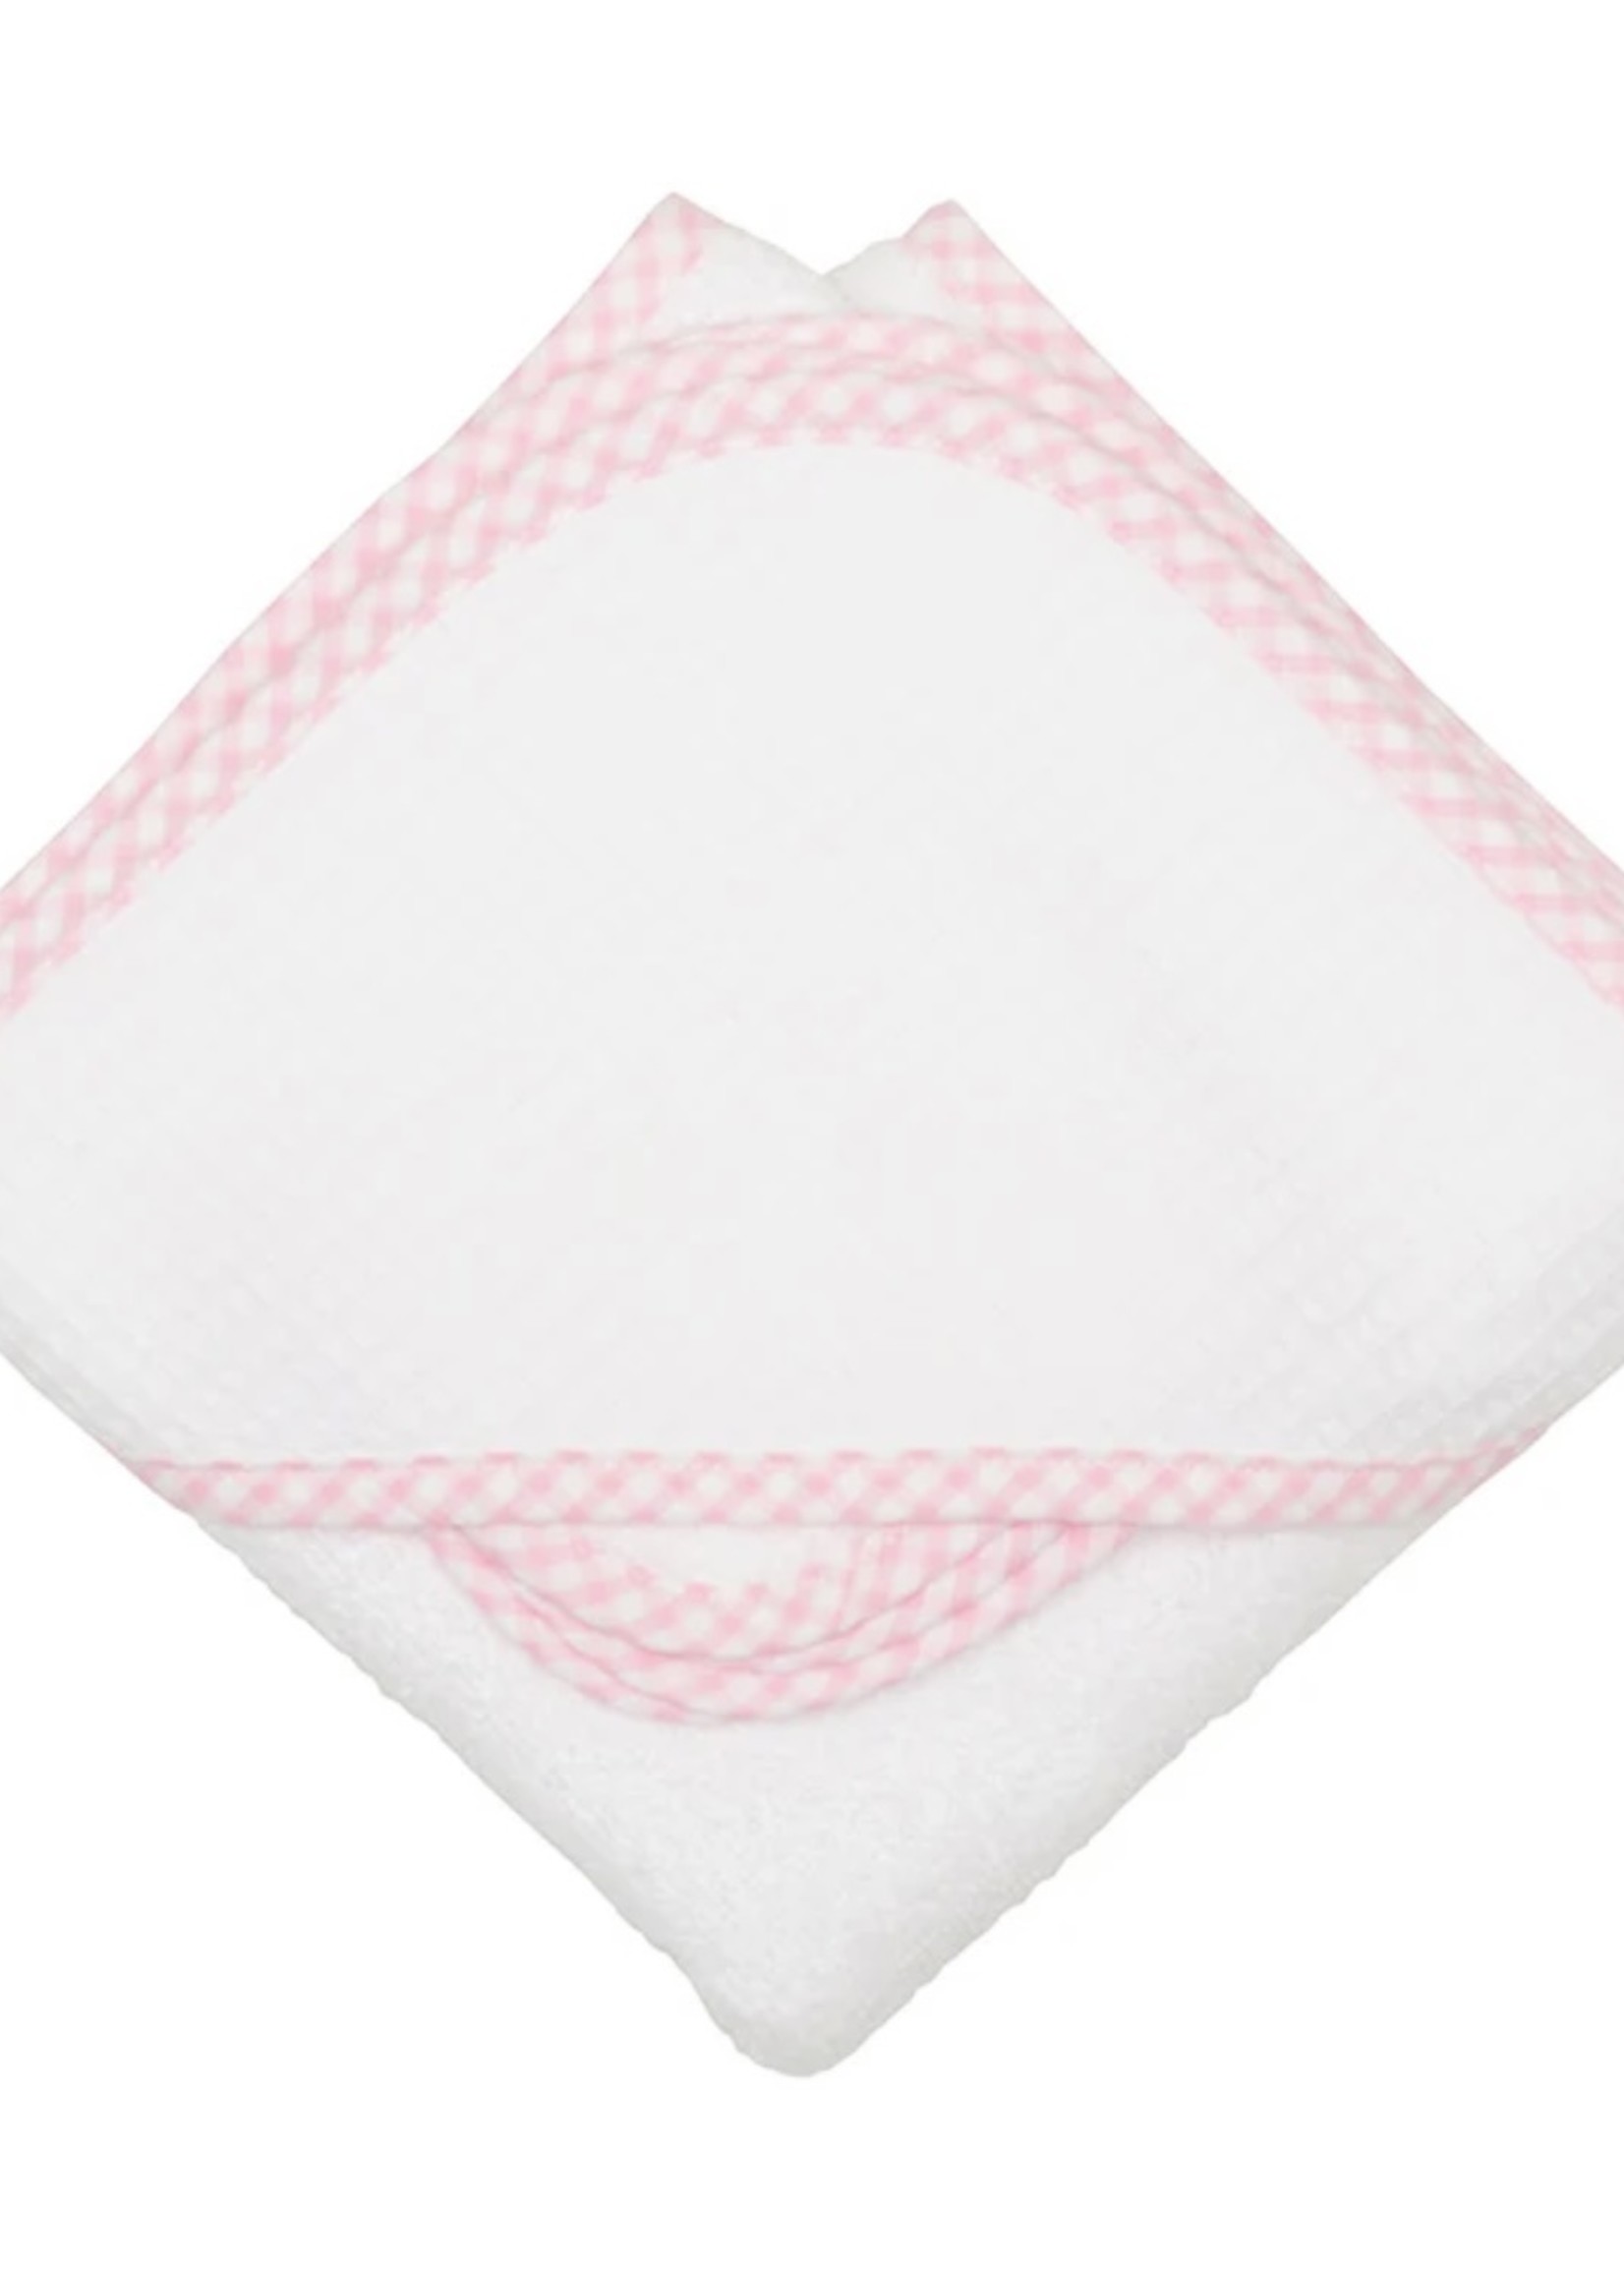 PINK CHECK HOODED TOWEL